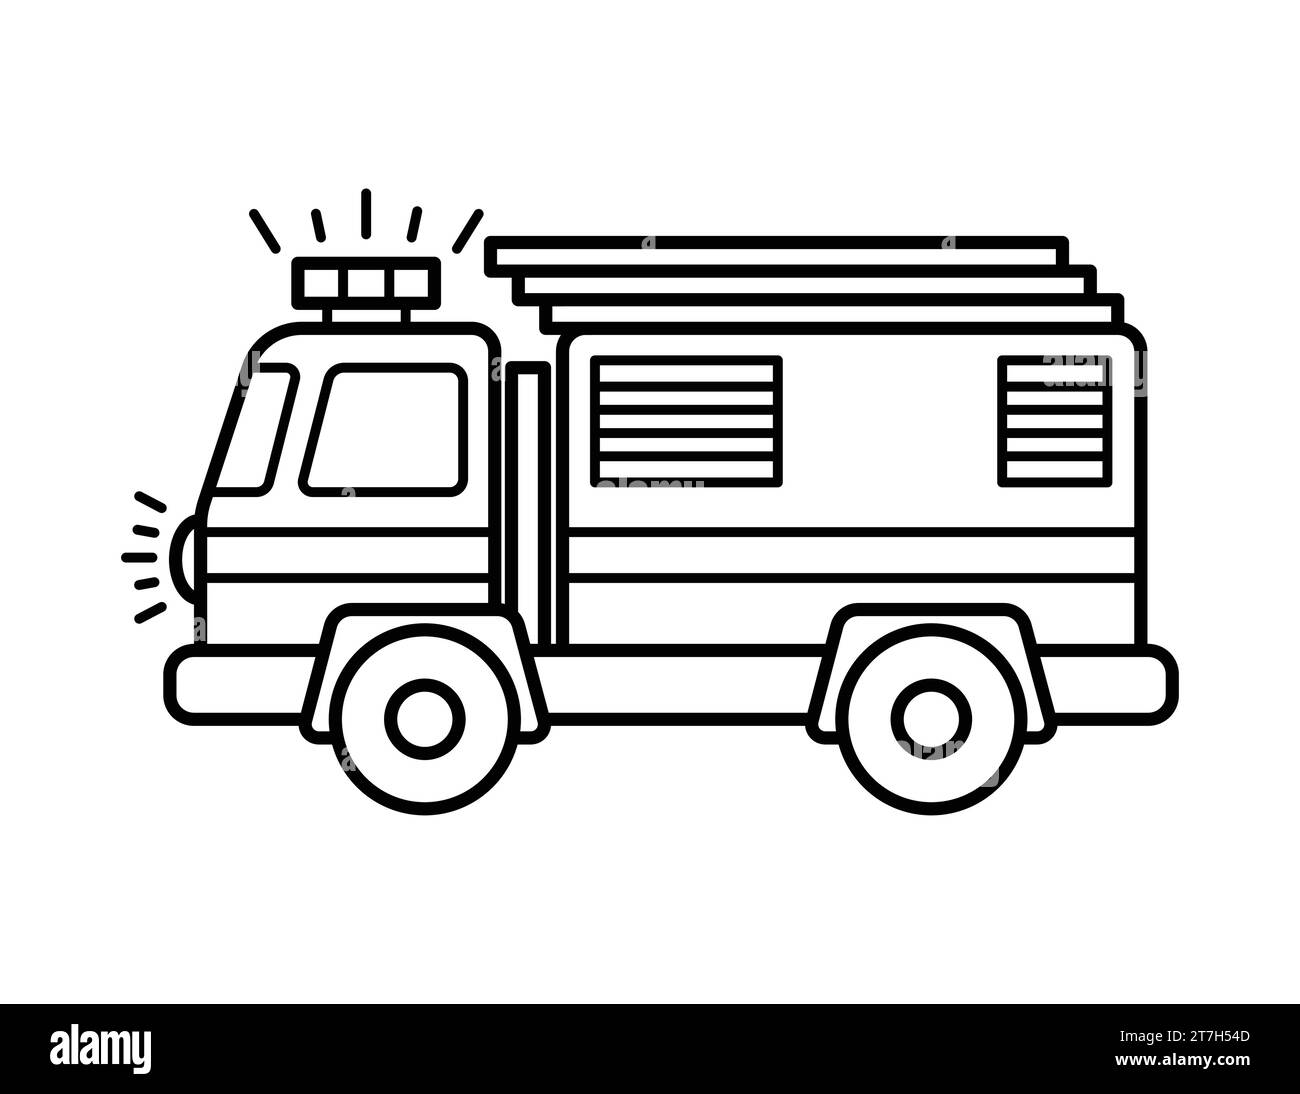 Fire Fighter Truck Coloring Page For Children Stock Vector